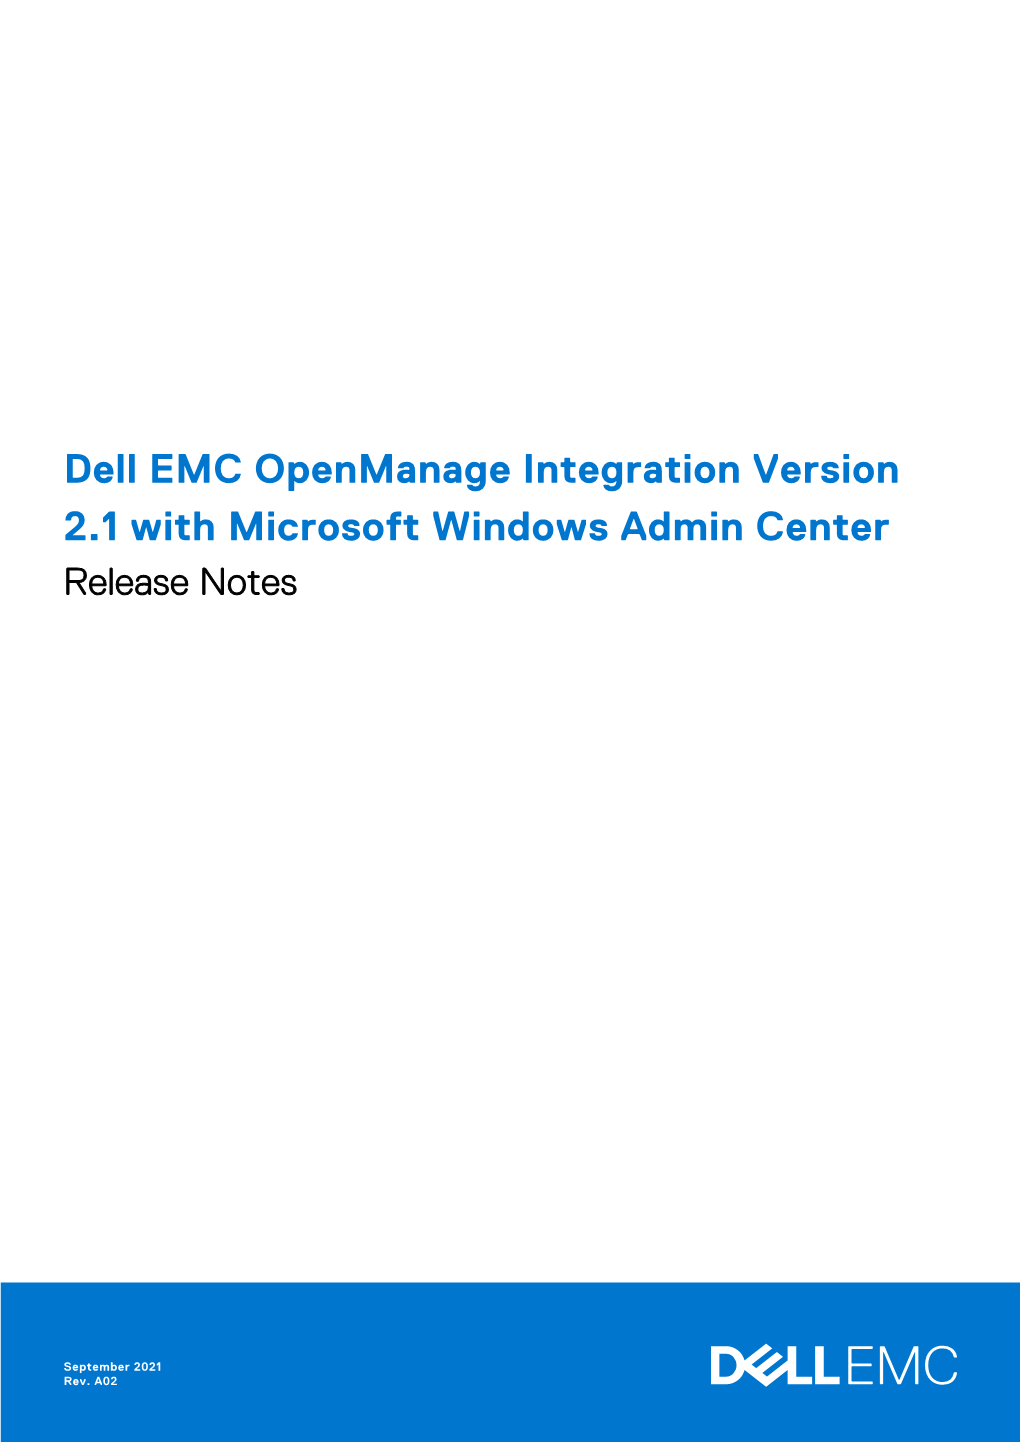 Dell EMC Openmanage Integration Version 2.1 with Microsoft Windows Admin Center Release Notes